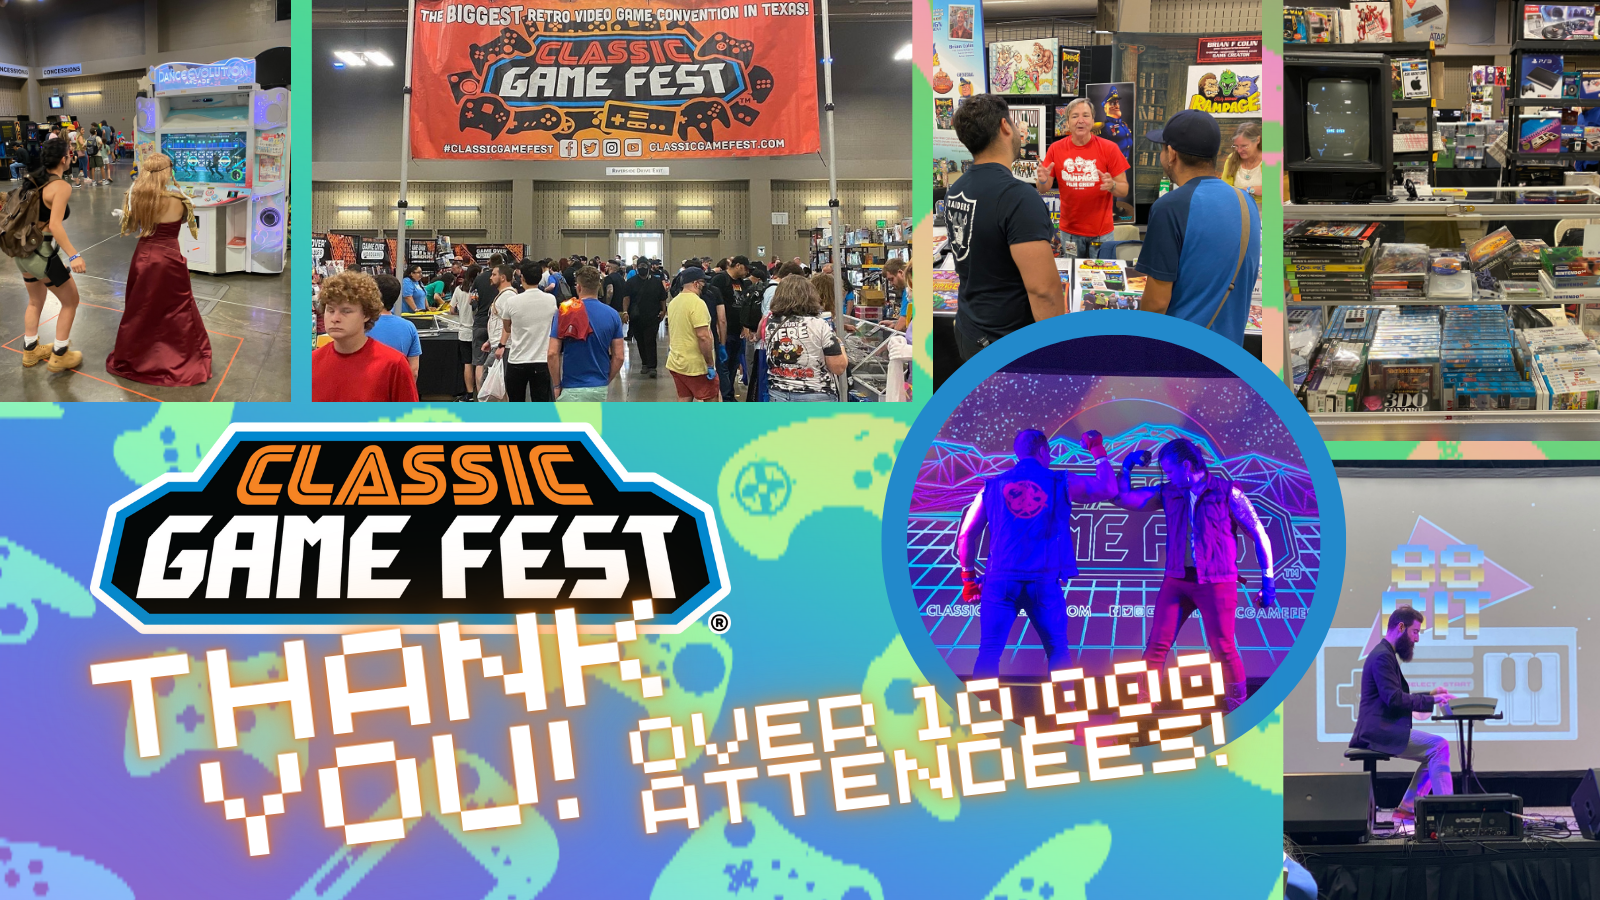 Tournaments at CGF - Classic Game Fest